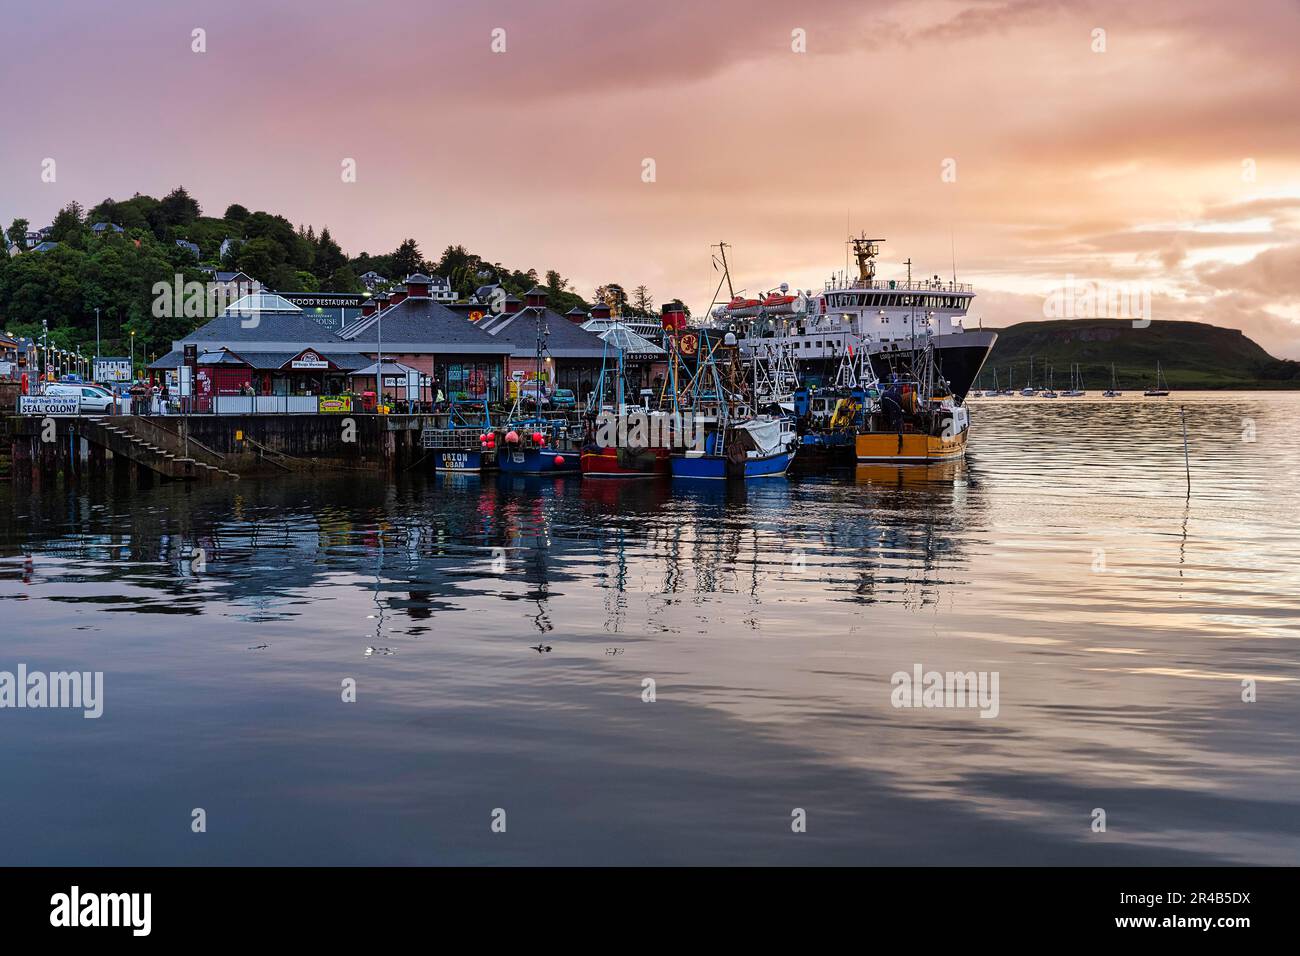 Boats in the harbour, evening sky, Oban harbour town, Oban Bay, Scotland, Great Britain Stock Photo